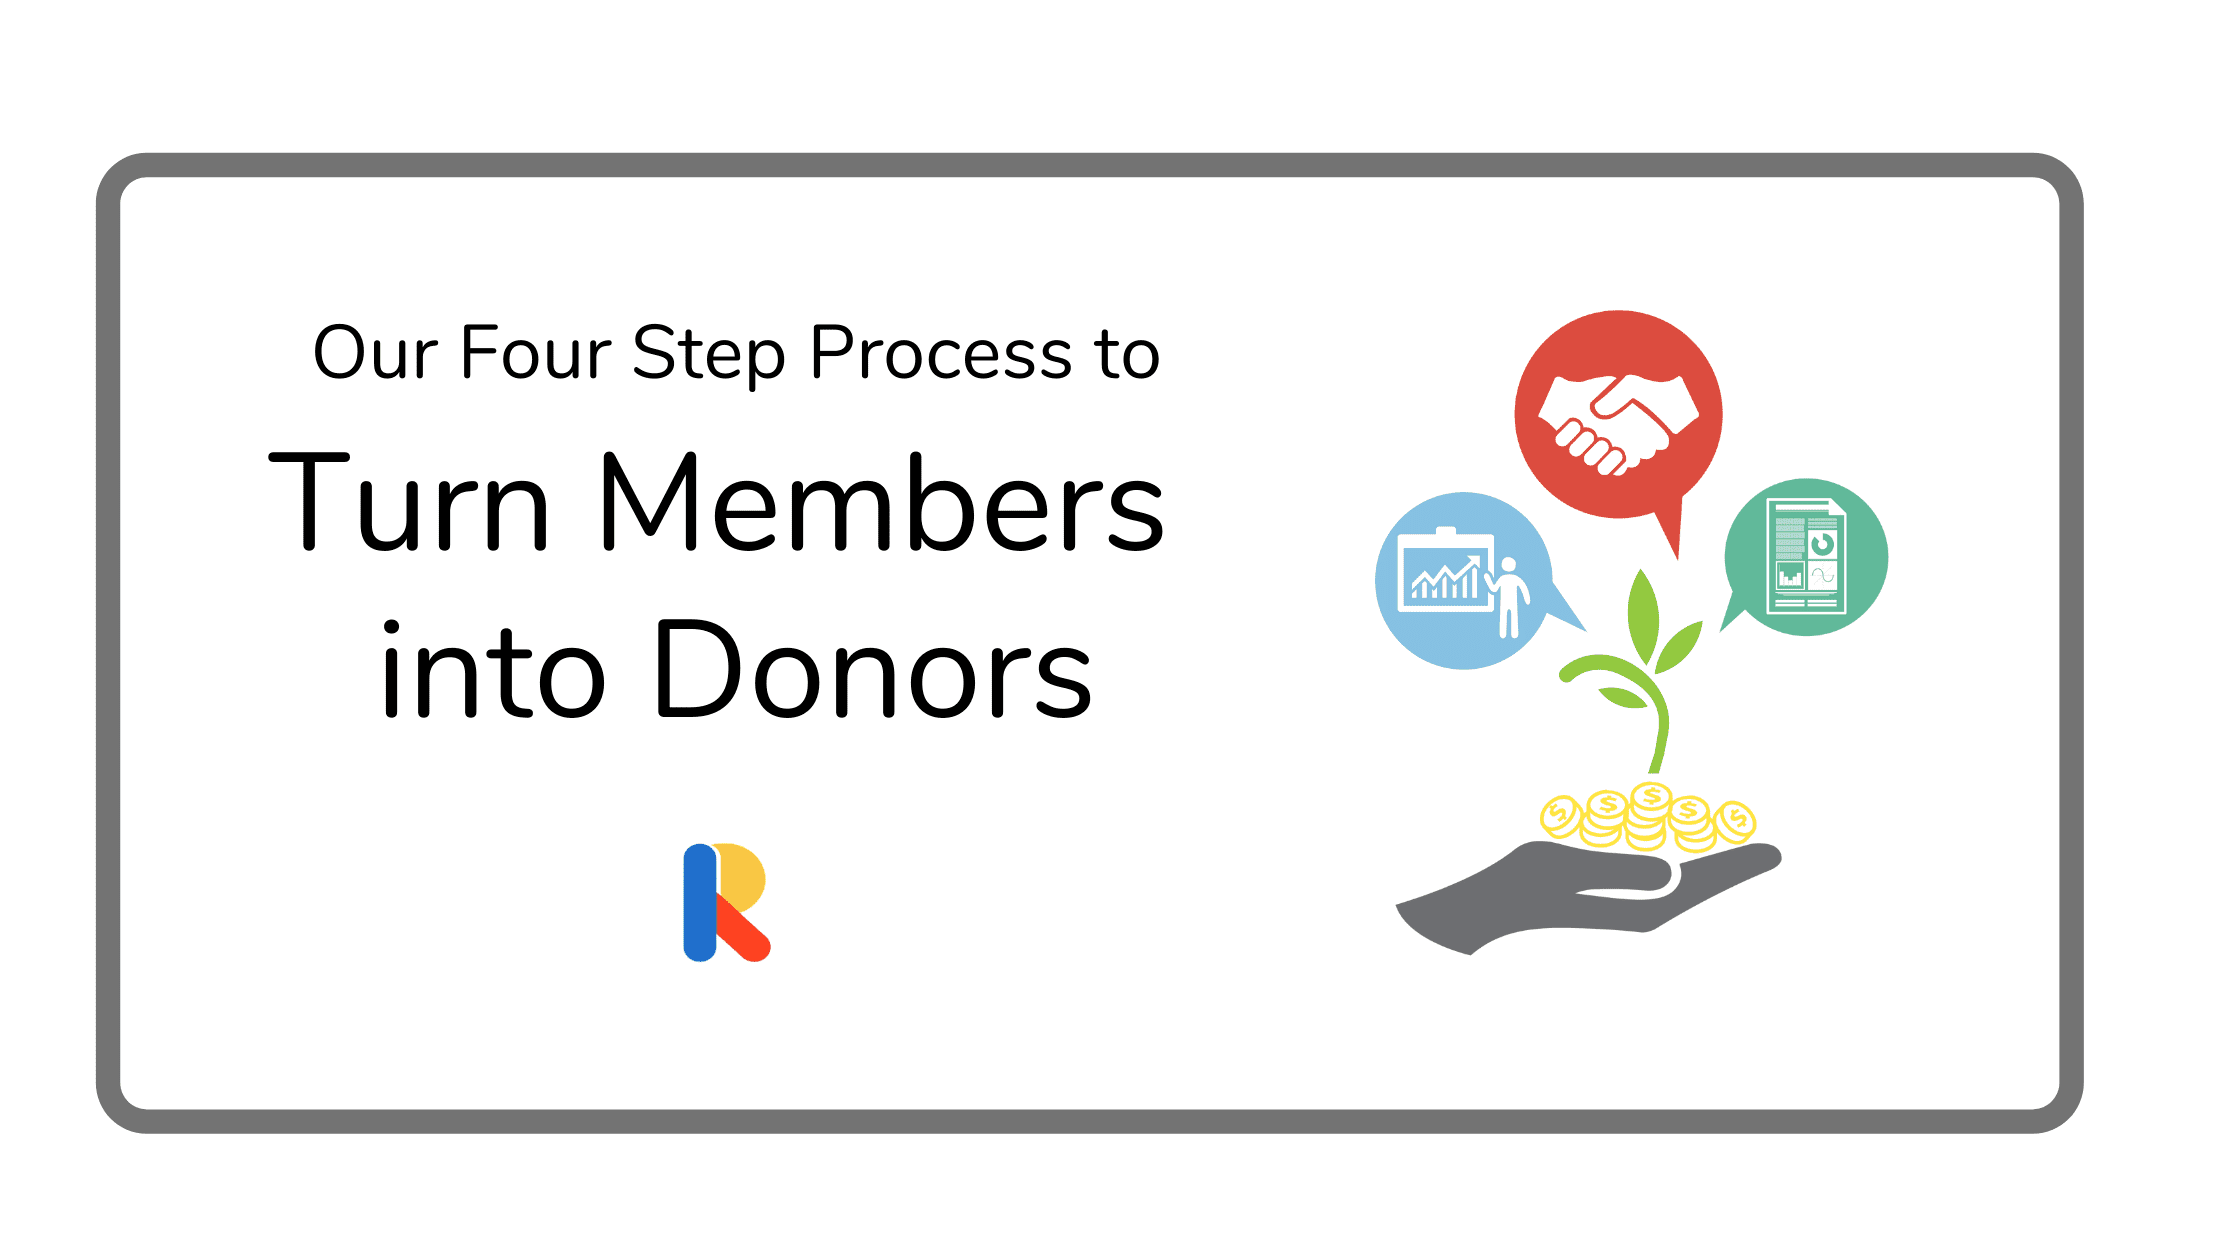 Our Four-Step Process to Turn Members into Donors